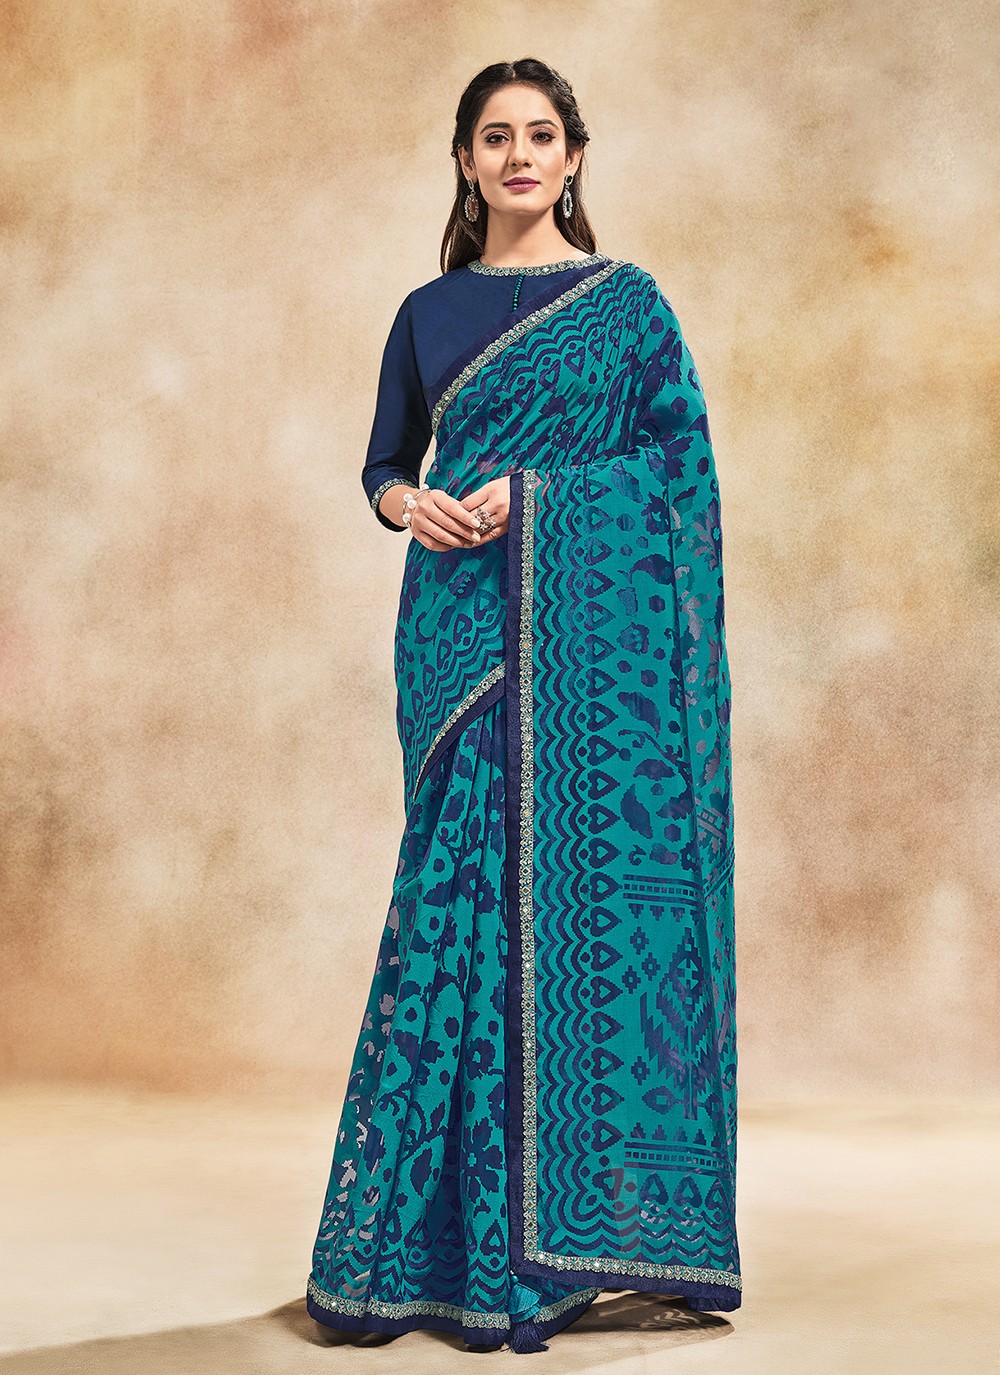 Teal Cord Contemporary Style Saree